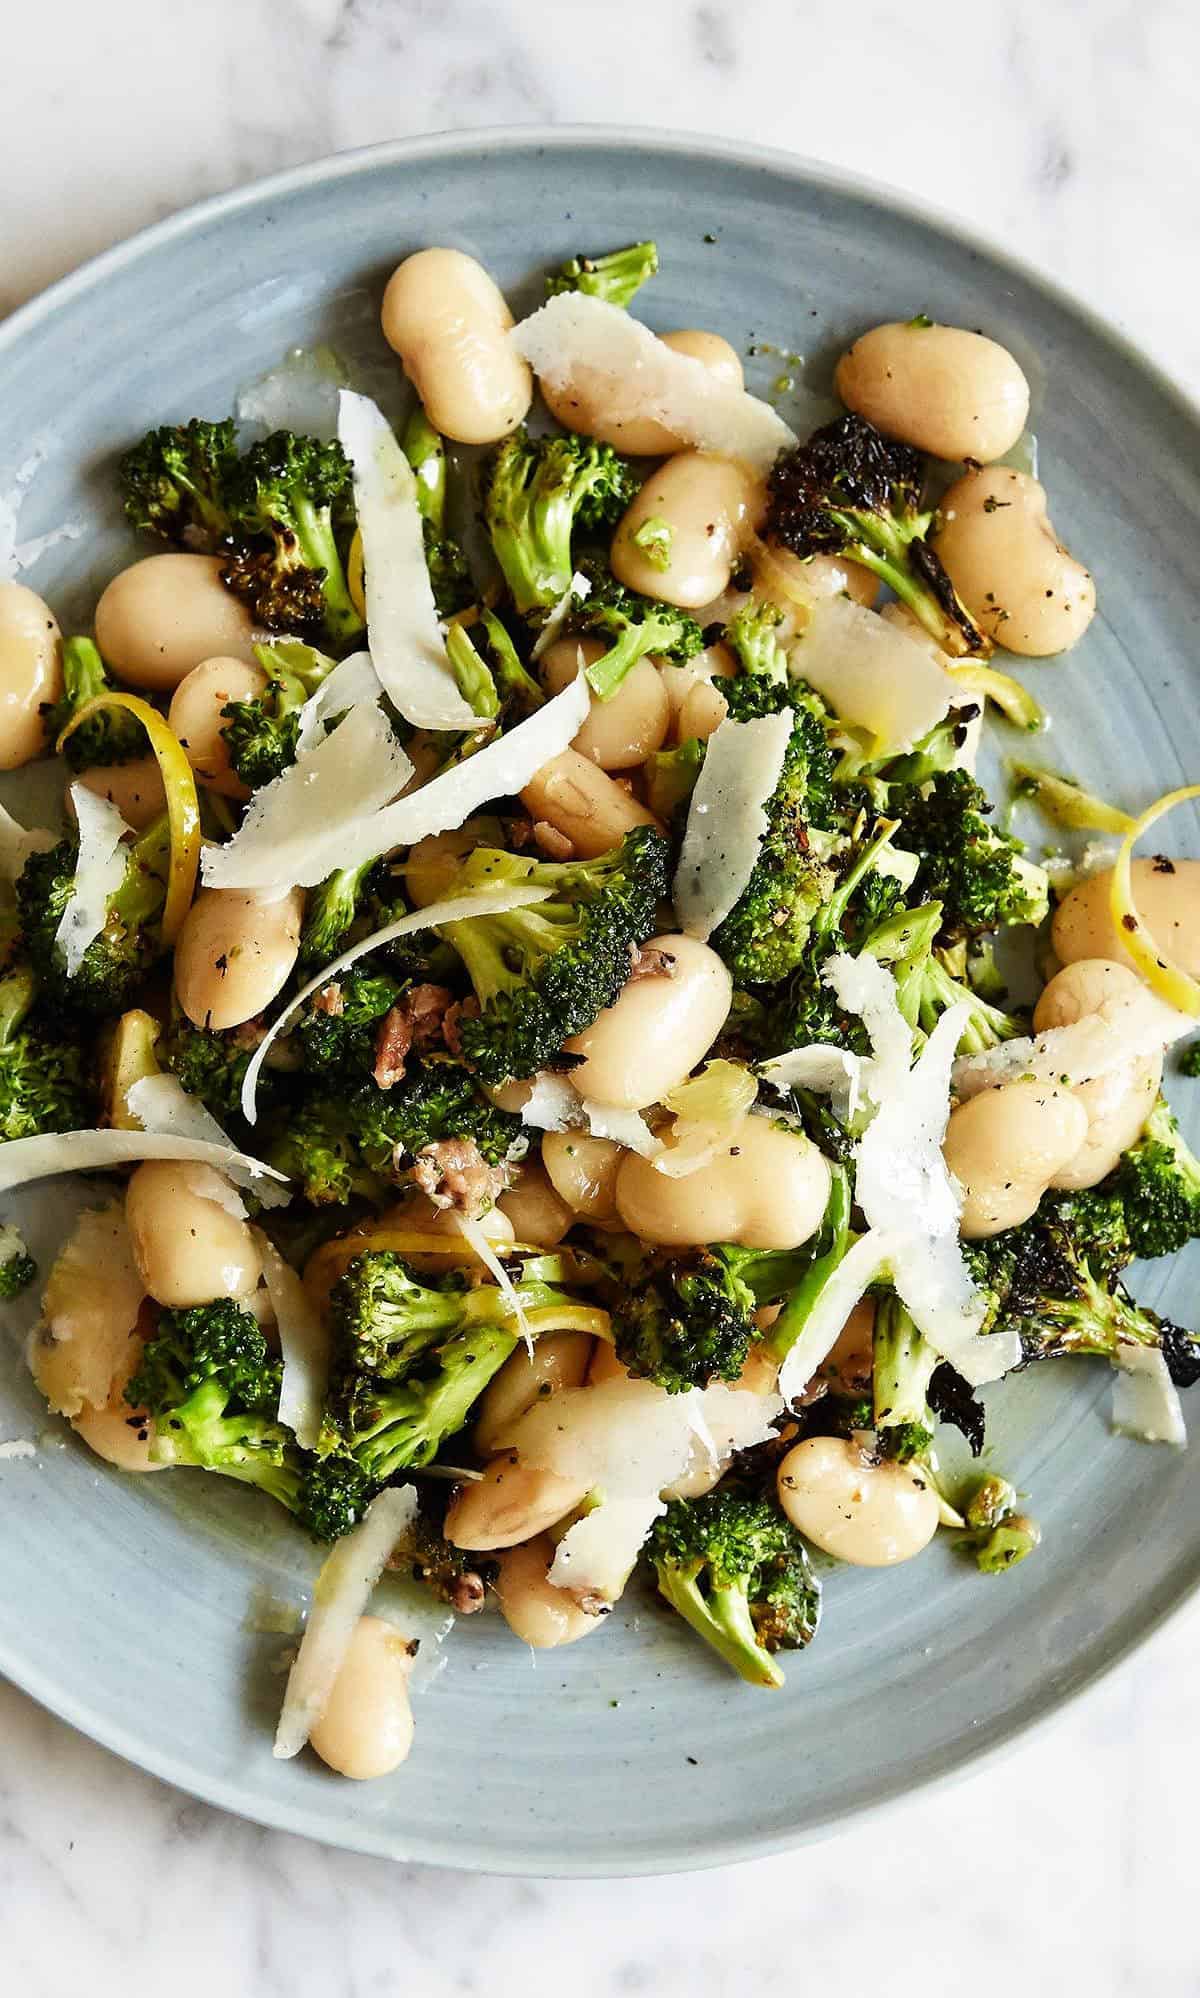  A tantalizing twist to your everyday chicken and broccoli meal!